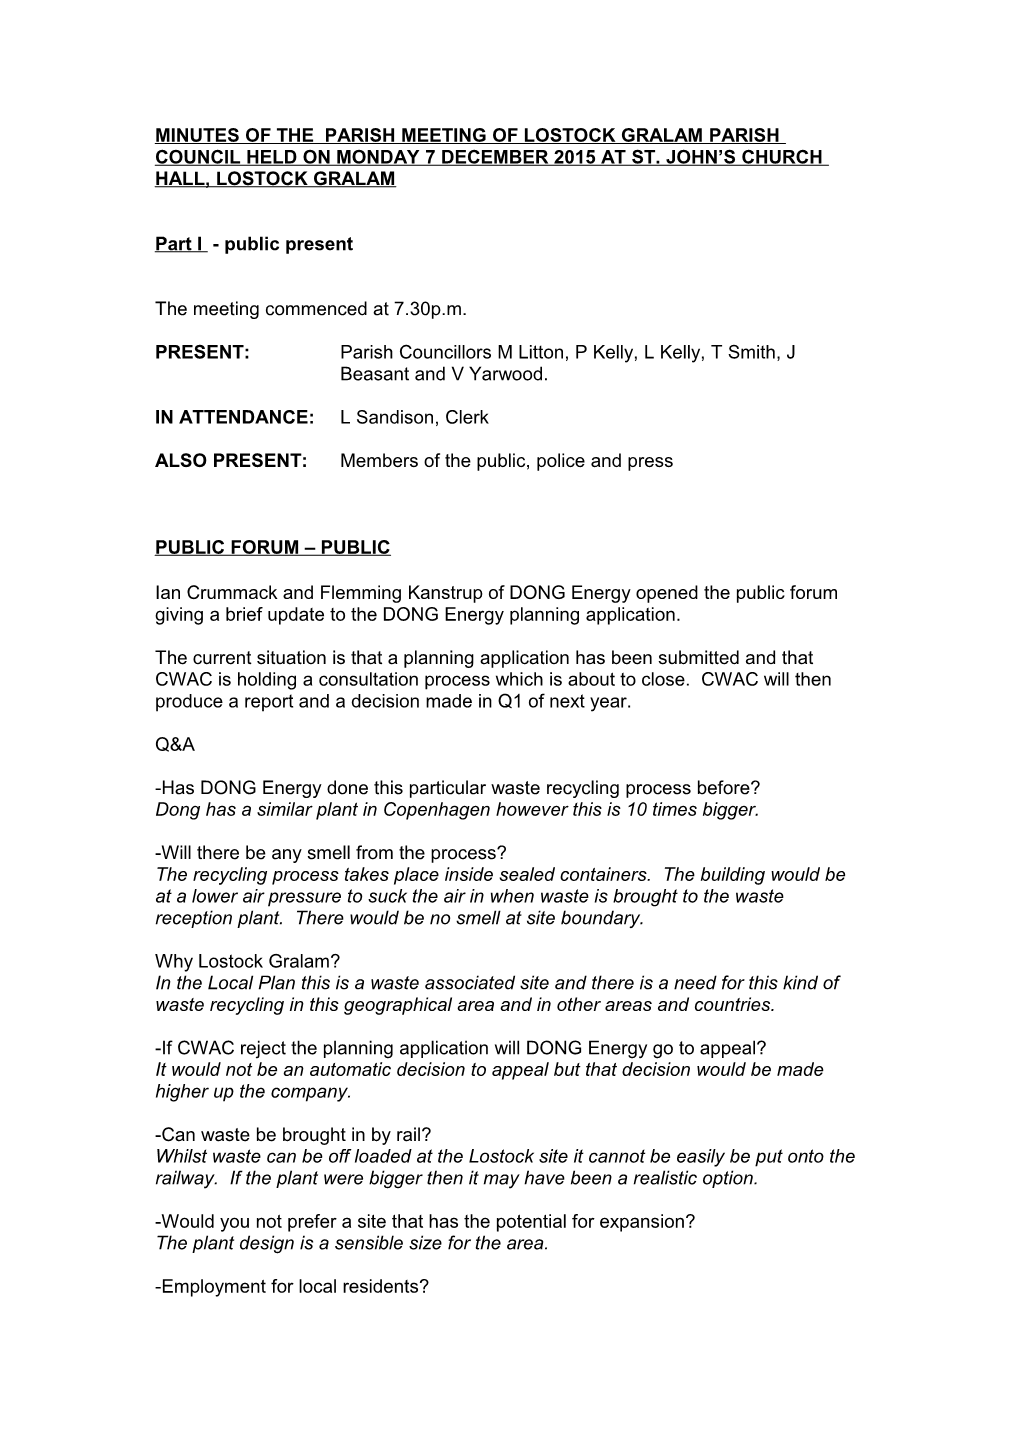 Minutes of the Meeting of Lostock Gralam Parish Council Held on Monday 3 November 2008